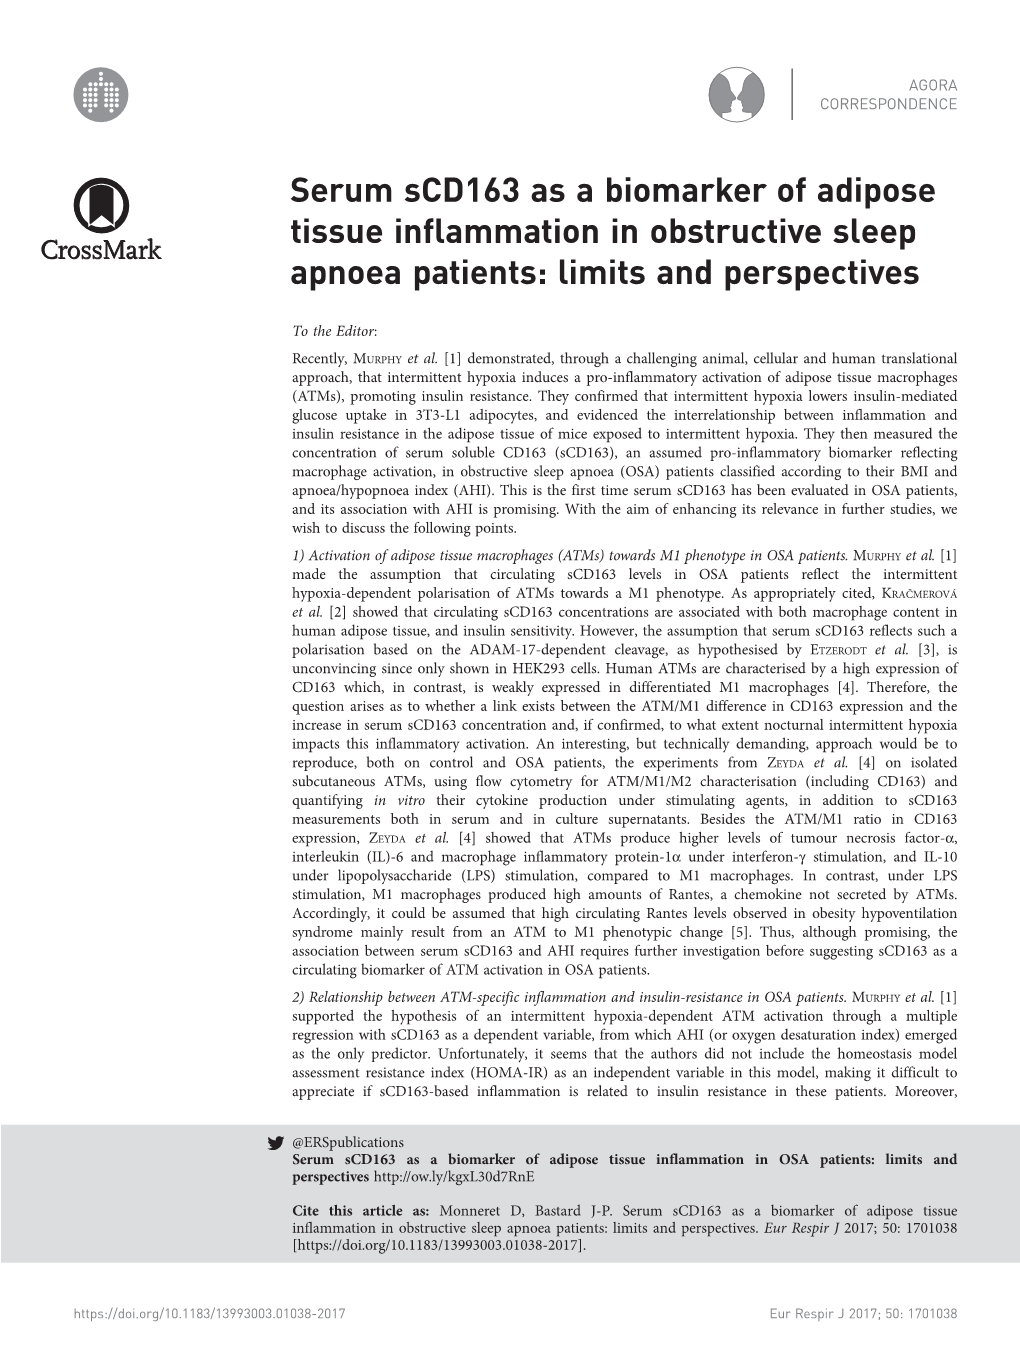 Serum Scd163 As a Biomarker of Adipose Tissue Inflammation in Obstructive Sleep Apnoea Patients: Limits and Perspectives